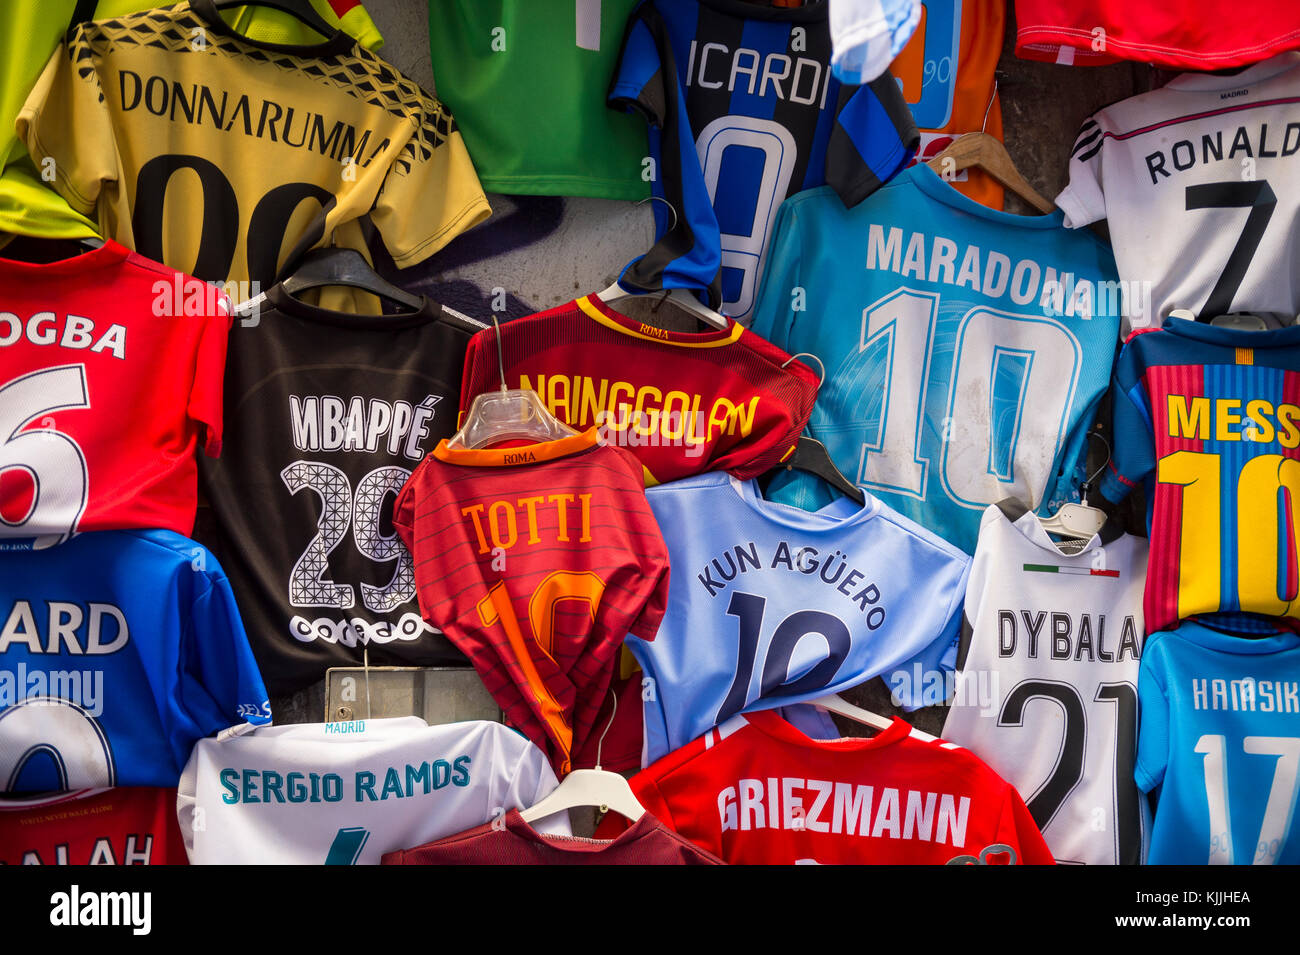 NAPLES, ITALY - OCTOBER 12, 2017: Colorful second-hand soccer team shirts  with player names and numbers hanging at a street market stall in the  histor Stock Photo - Alamy